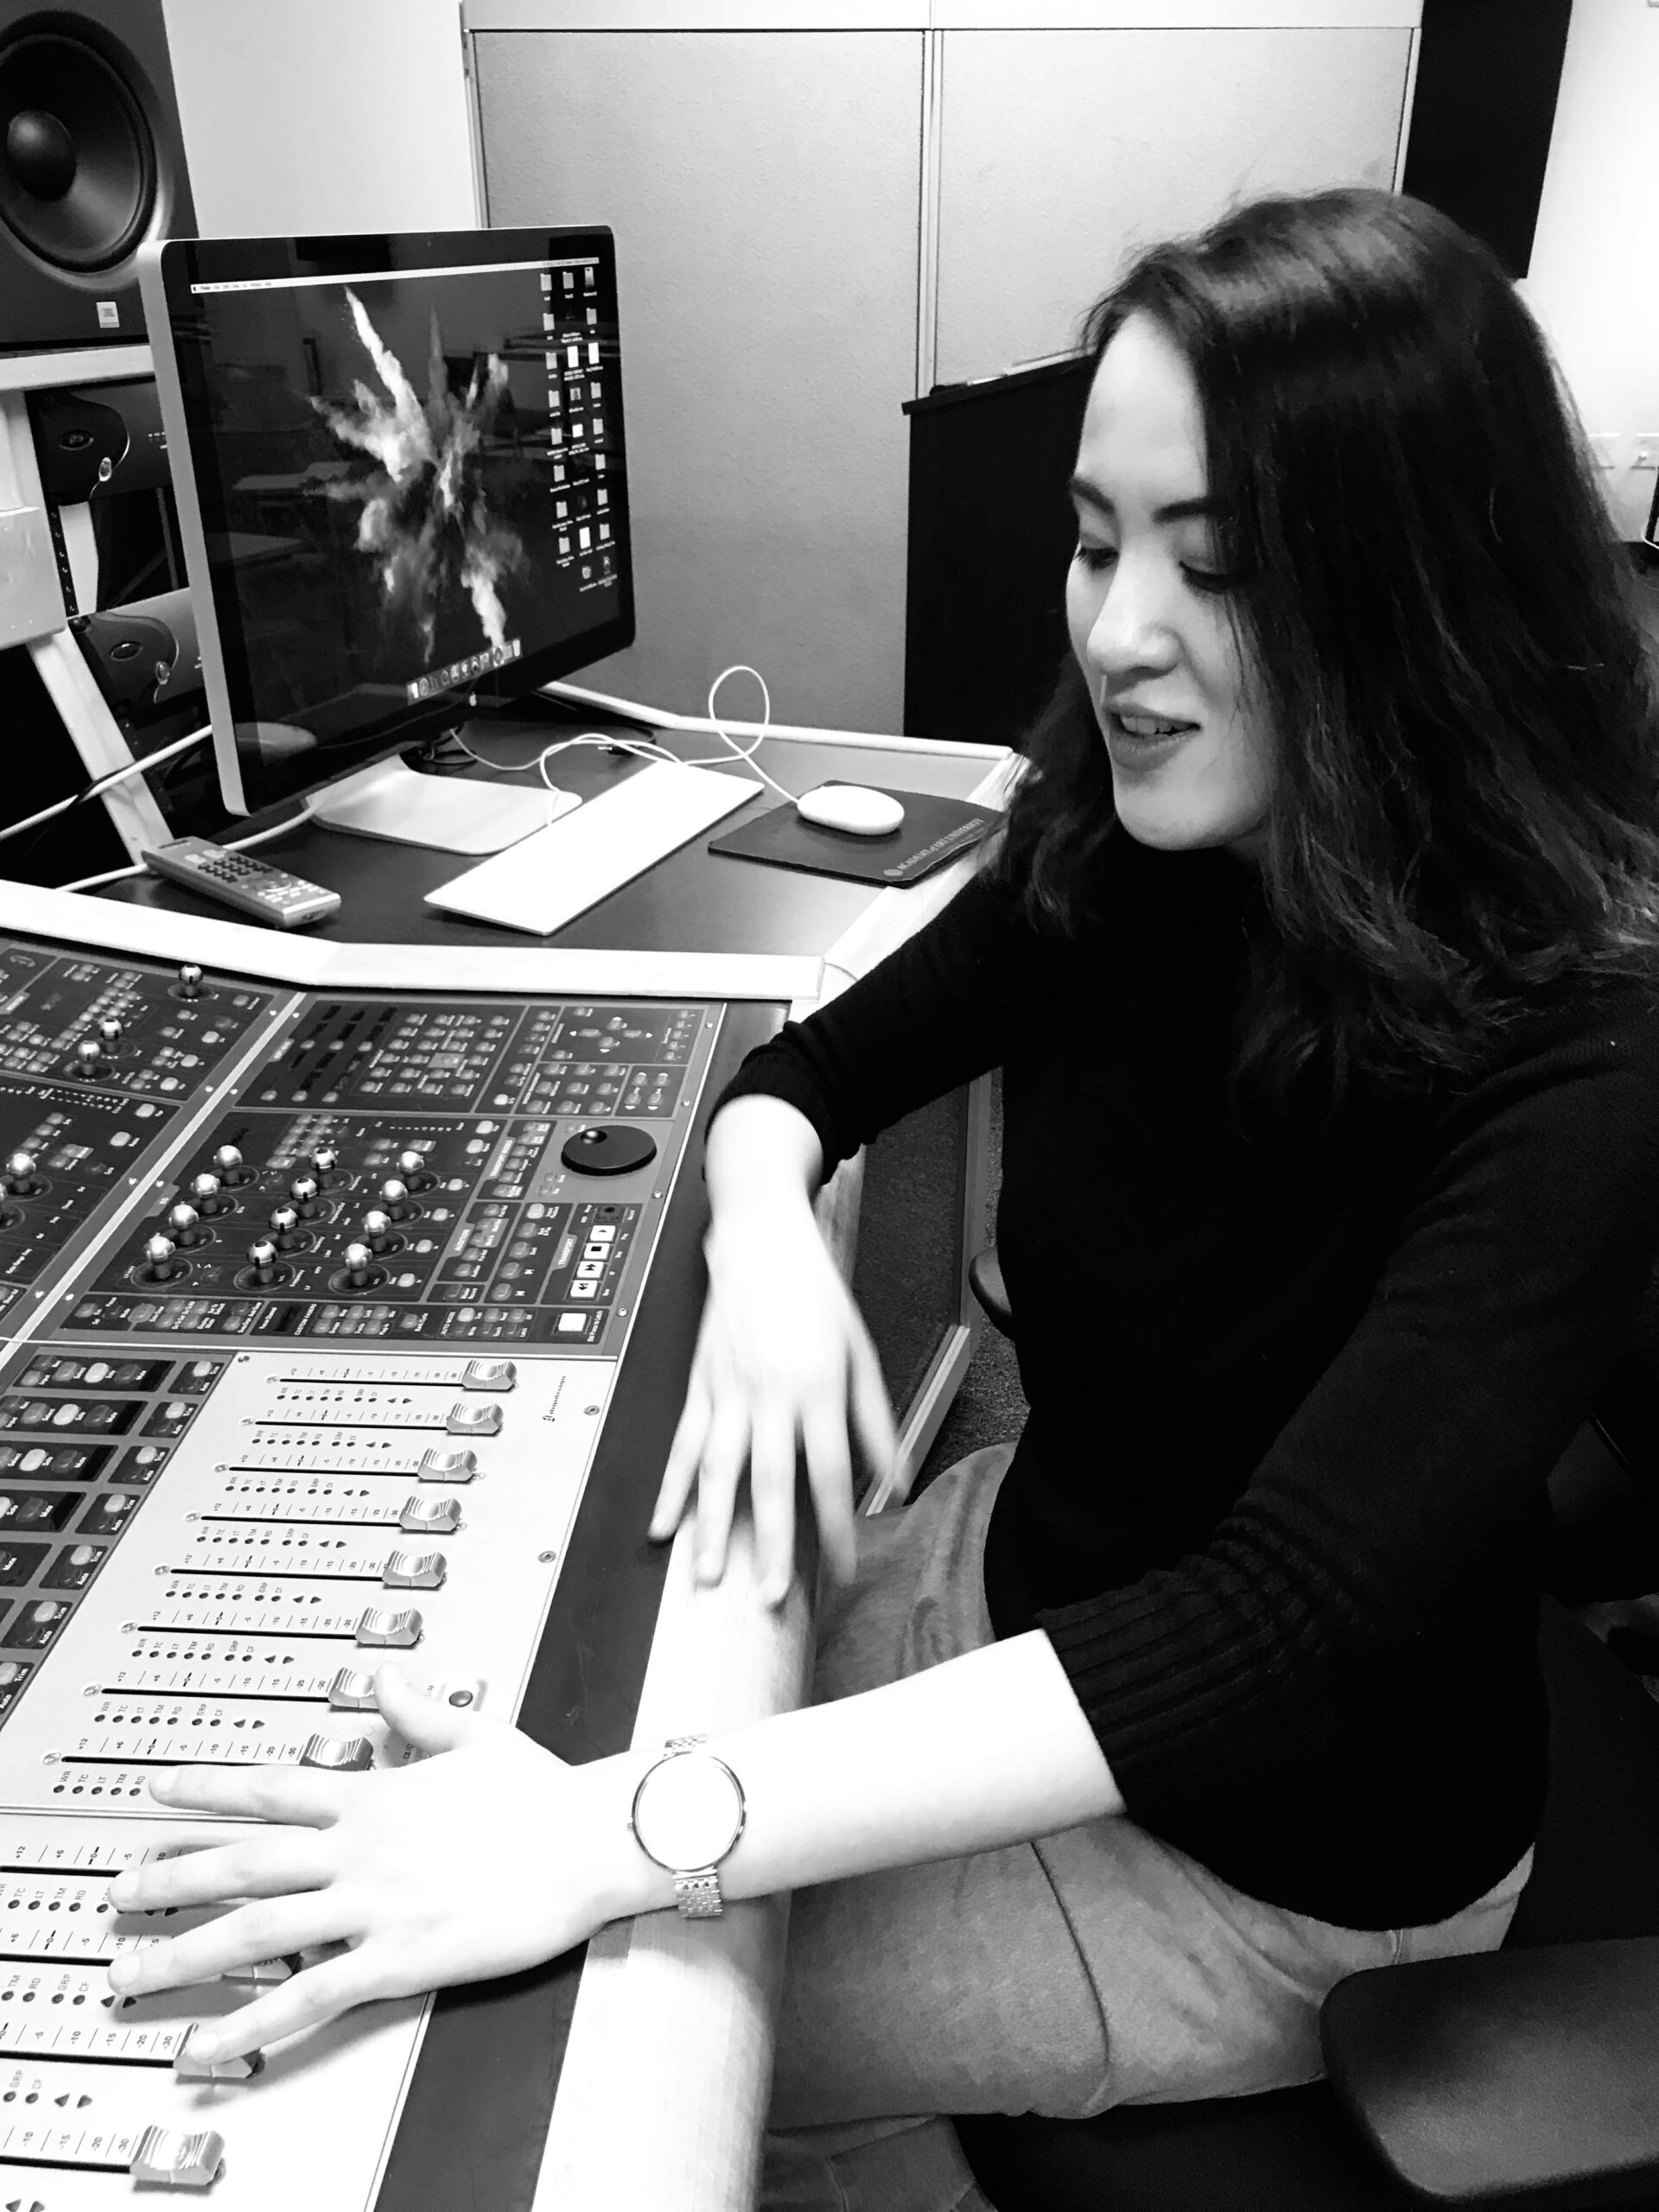 Hannah Hsieh producing music at the music production college in Academy of Art University